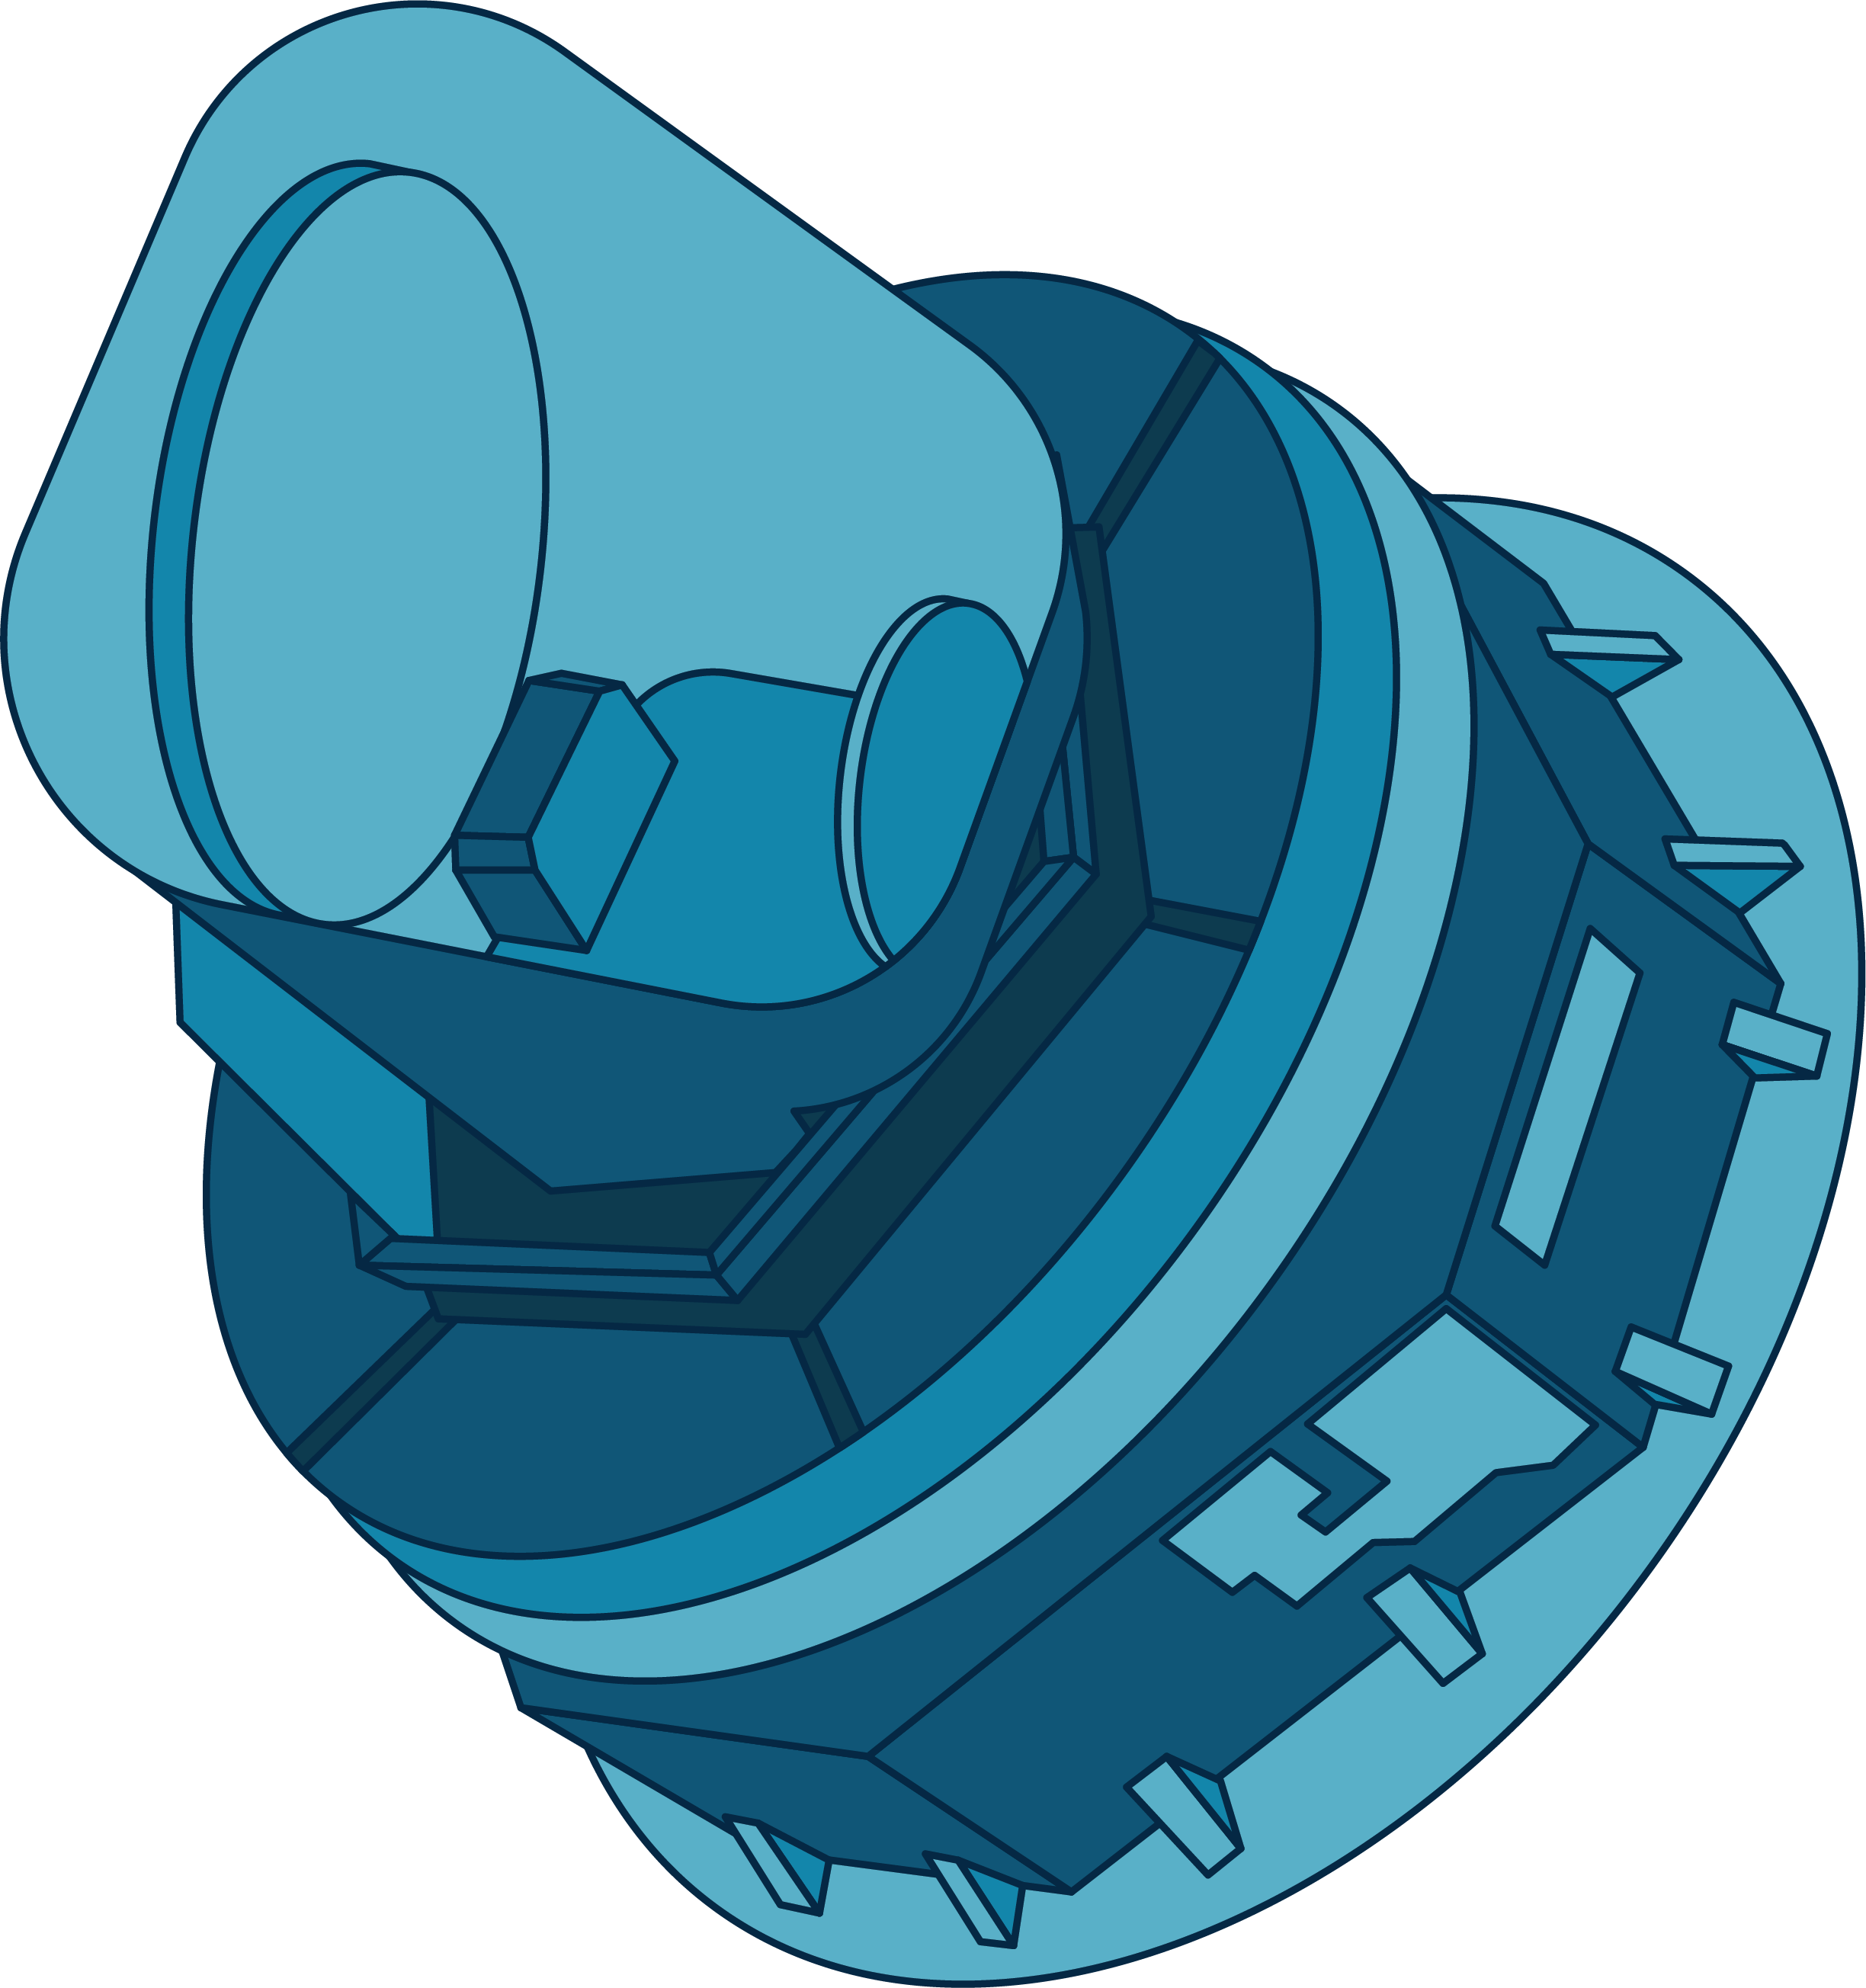 This illustration shows ESA's Planck spacecraft in shades of blue. The craft has a circular base topped by a short instrument with an open top and instrument pieces visible inside.